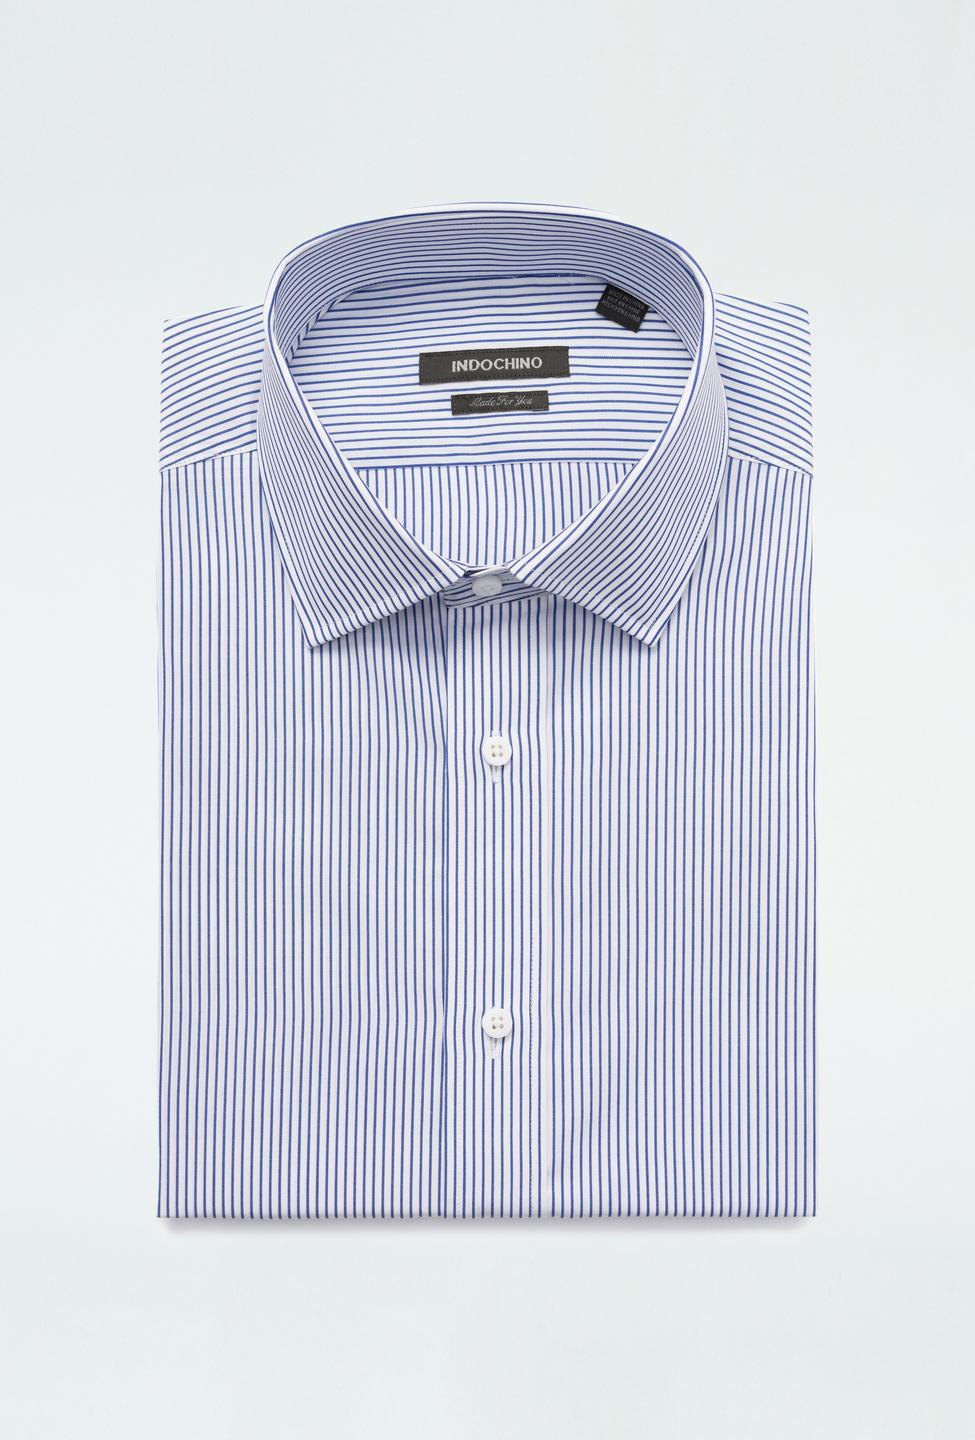 Blue shirt - Harrow Striped Design from Premium Indochino Collection